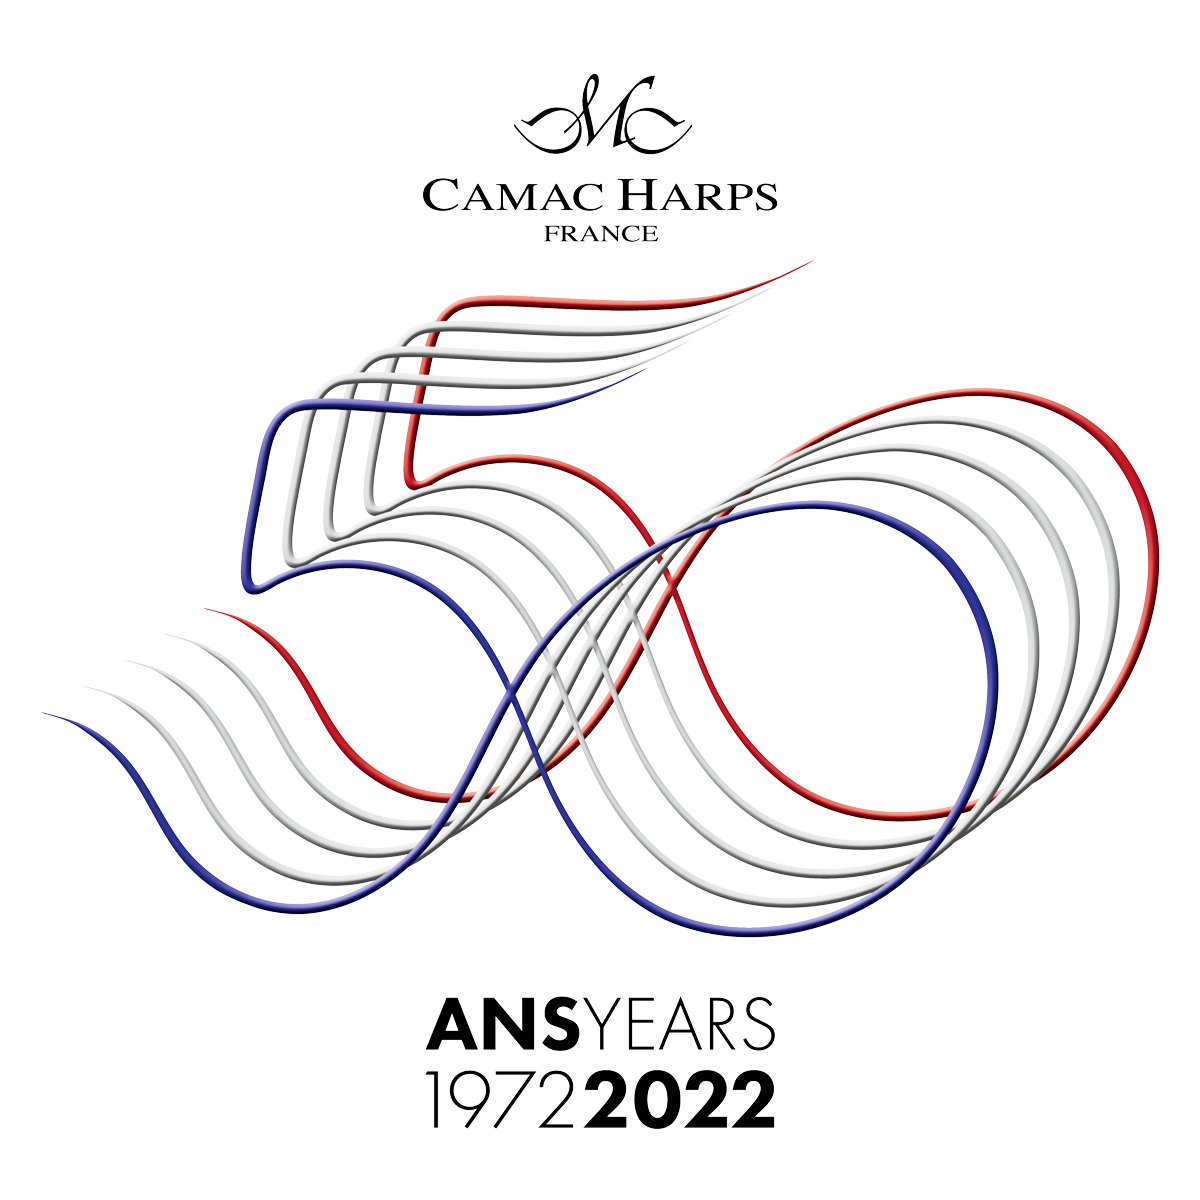 Concert Logo - Silver Jubilee - Openclipart